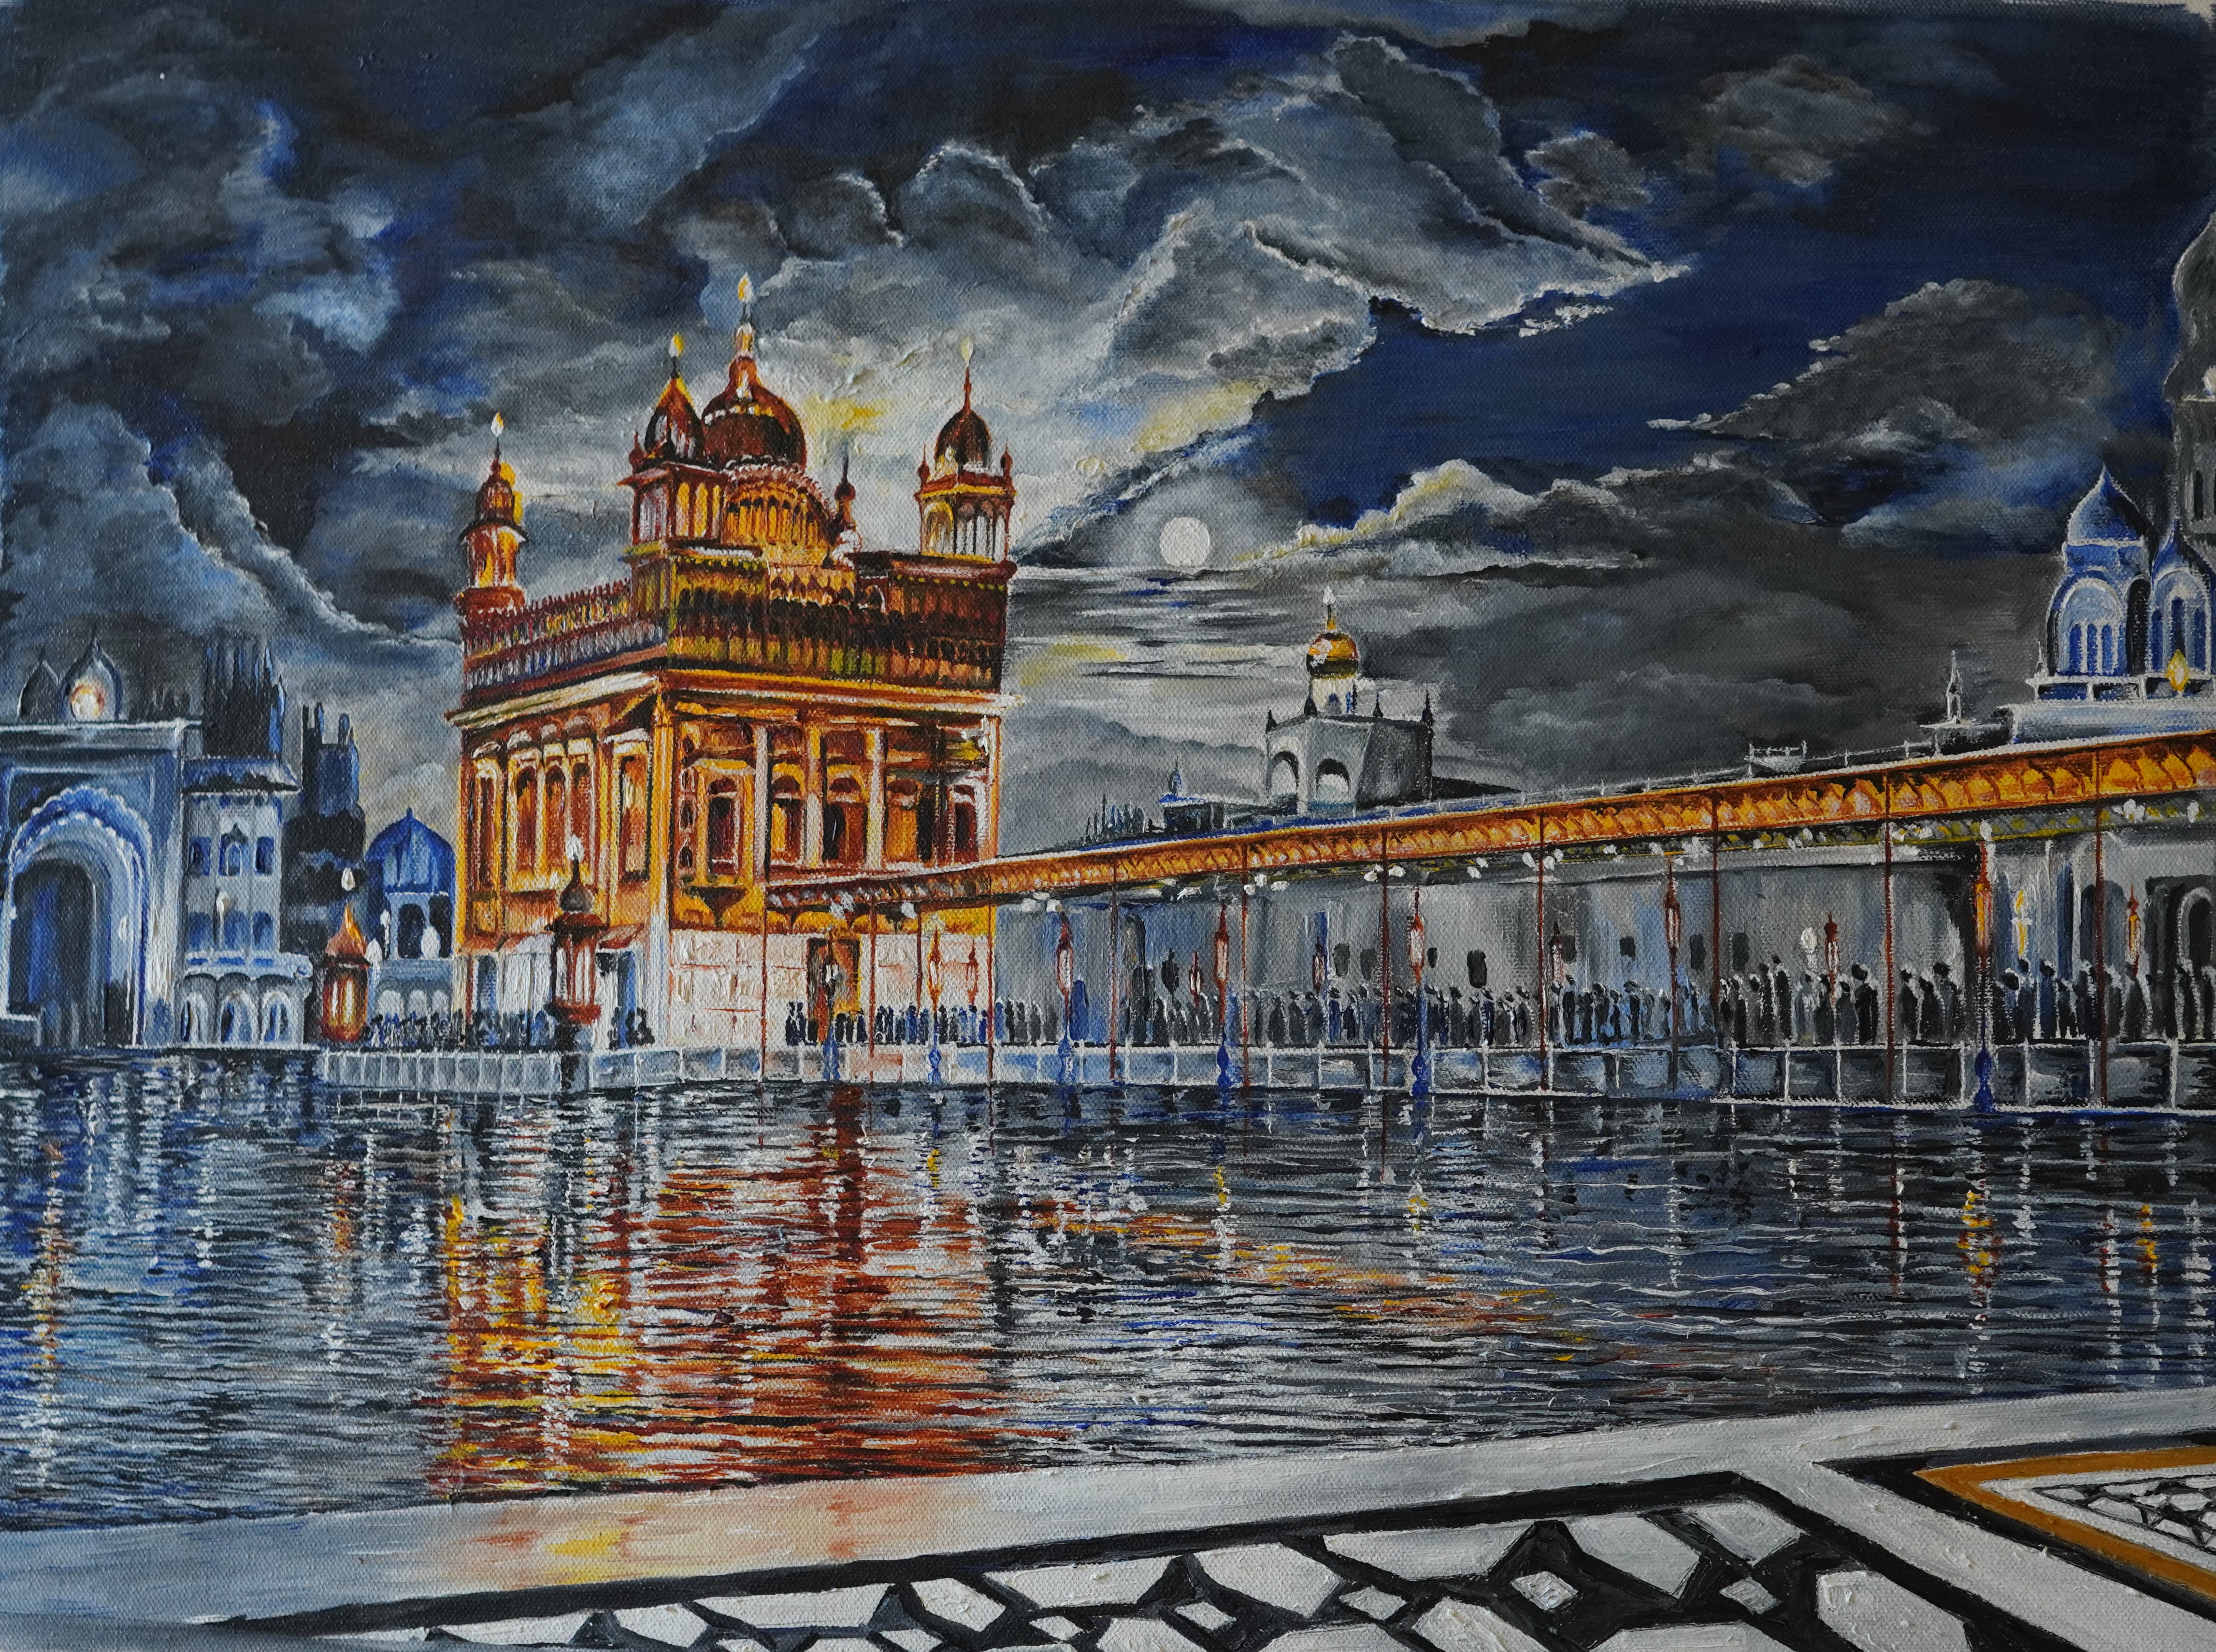 Golden Temple At Night